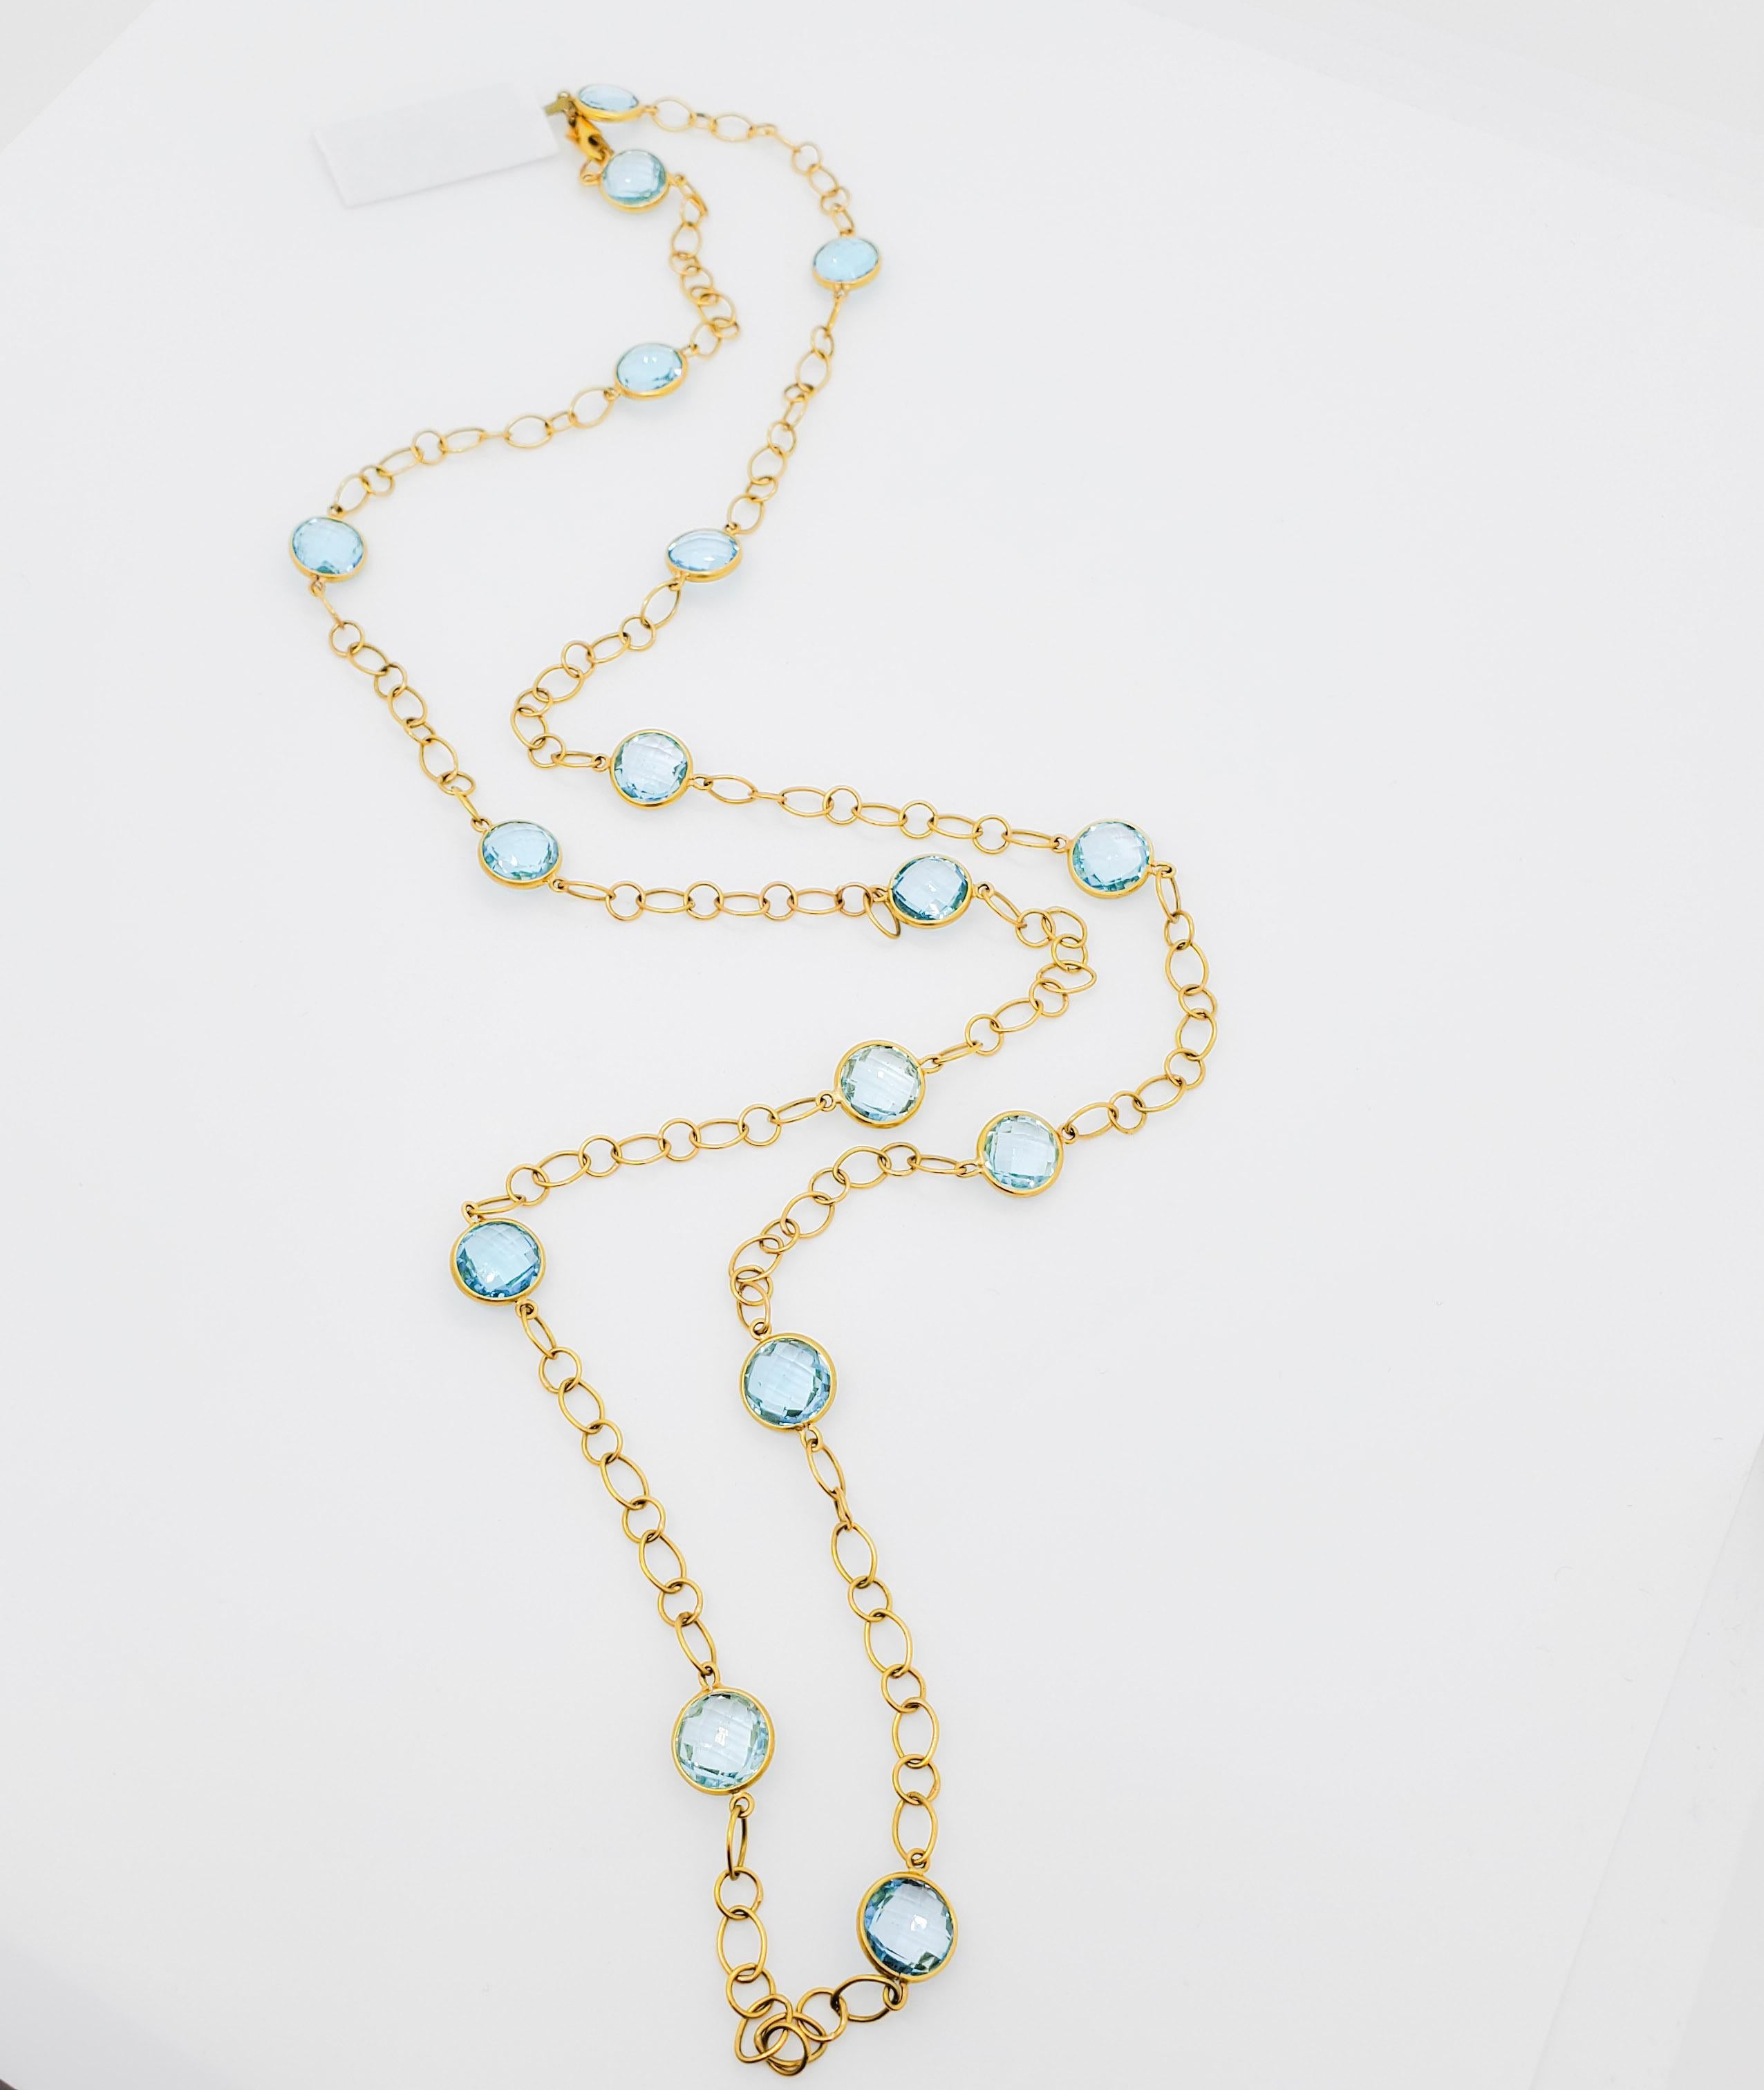 Blue Topaz Bezel Chain Necklace in 18k Yellow Gold For Sale 2